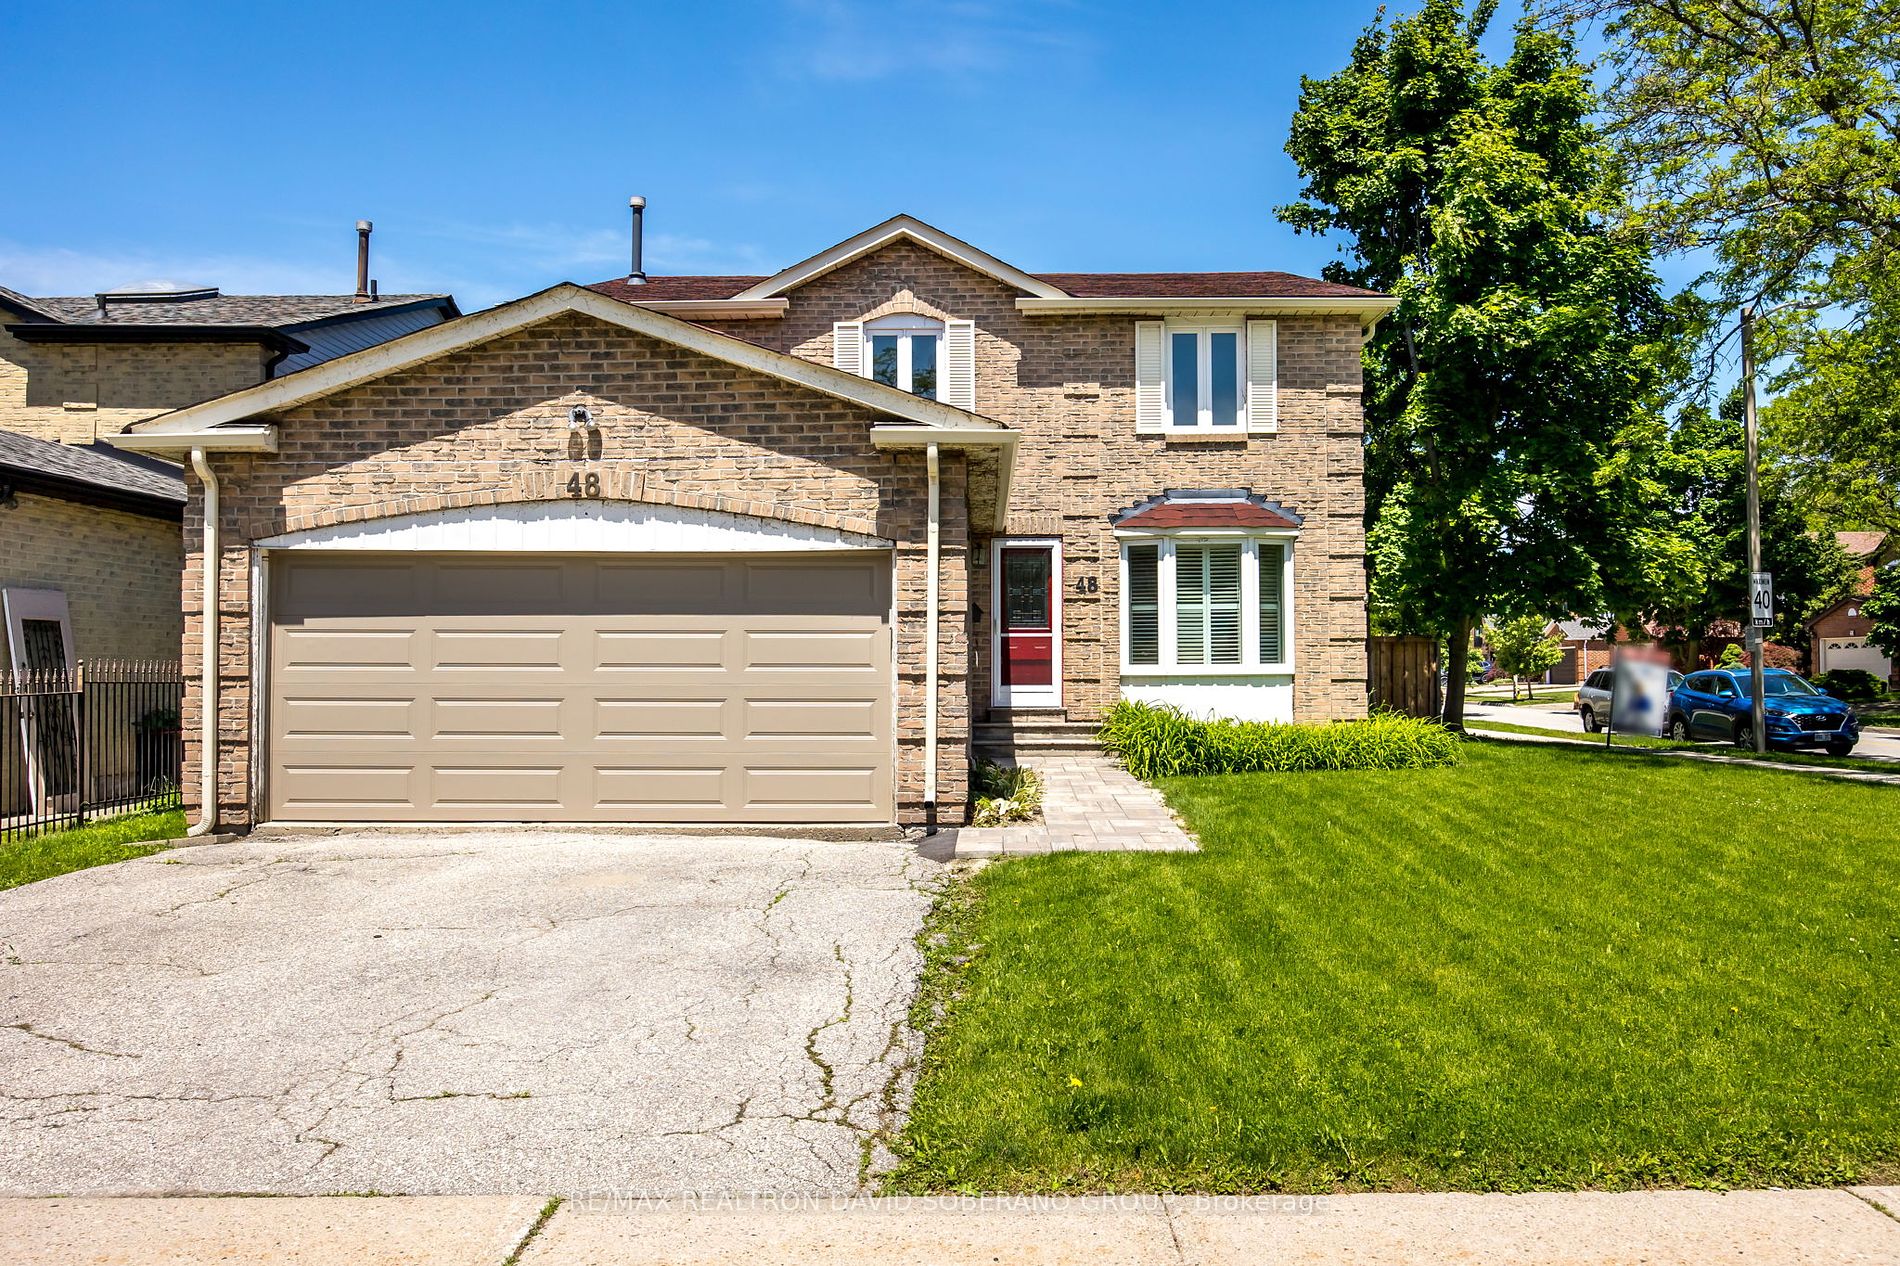 Detached house for sale at 48 Mullen Dr Vaughan Ontario